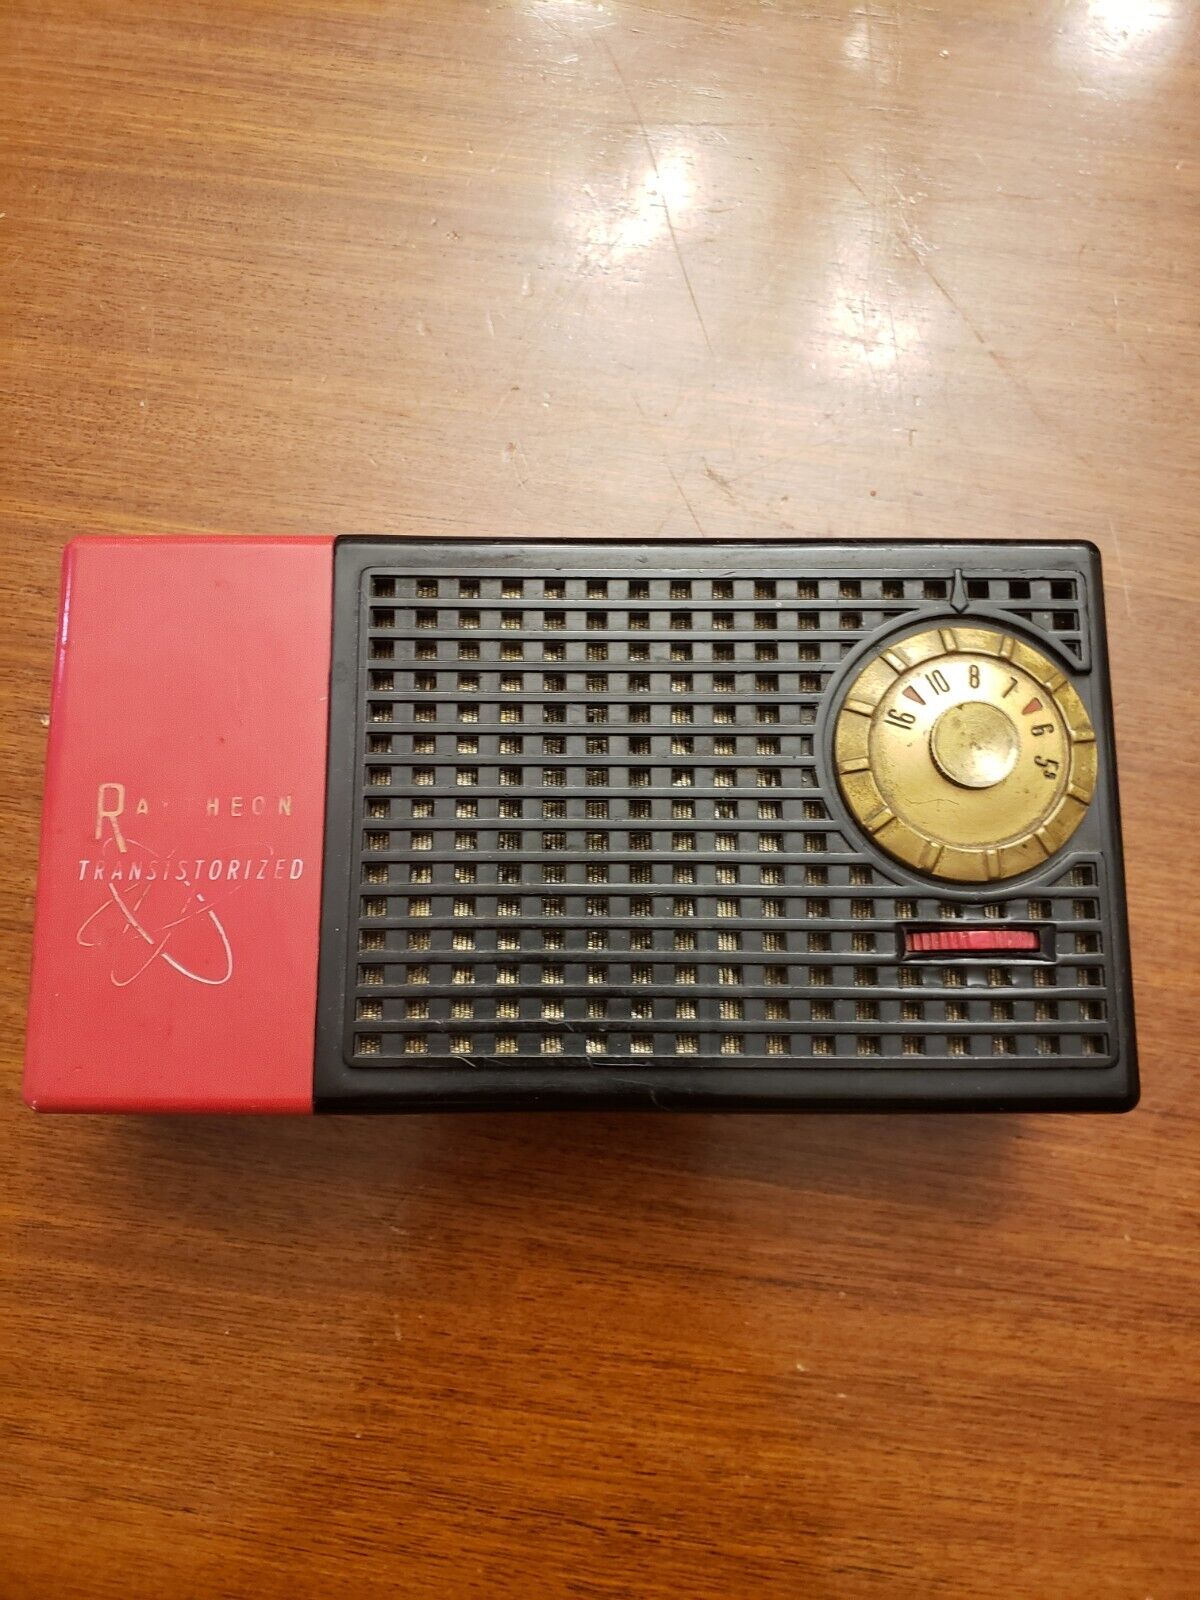 Raytheon T-100 Transistor Radio.  No Cracks Or Chips. Does Not Work.